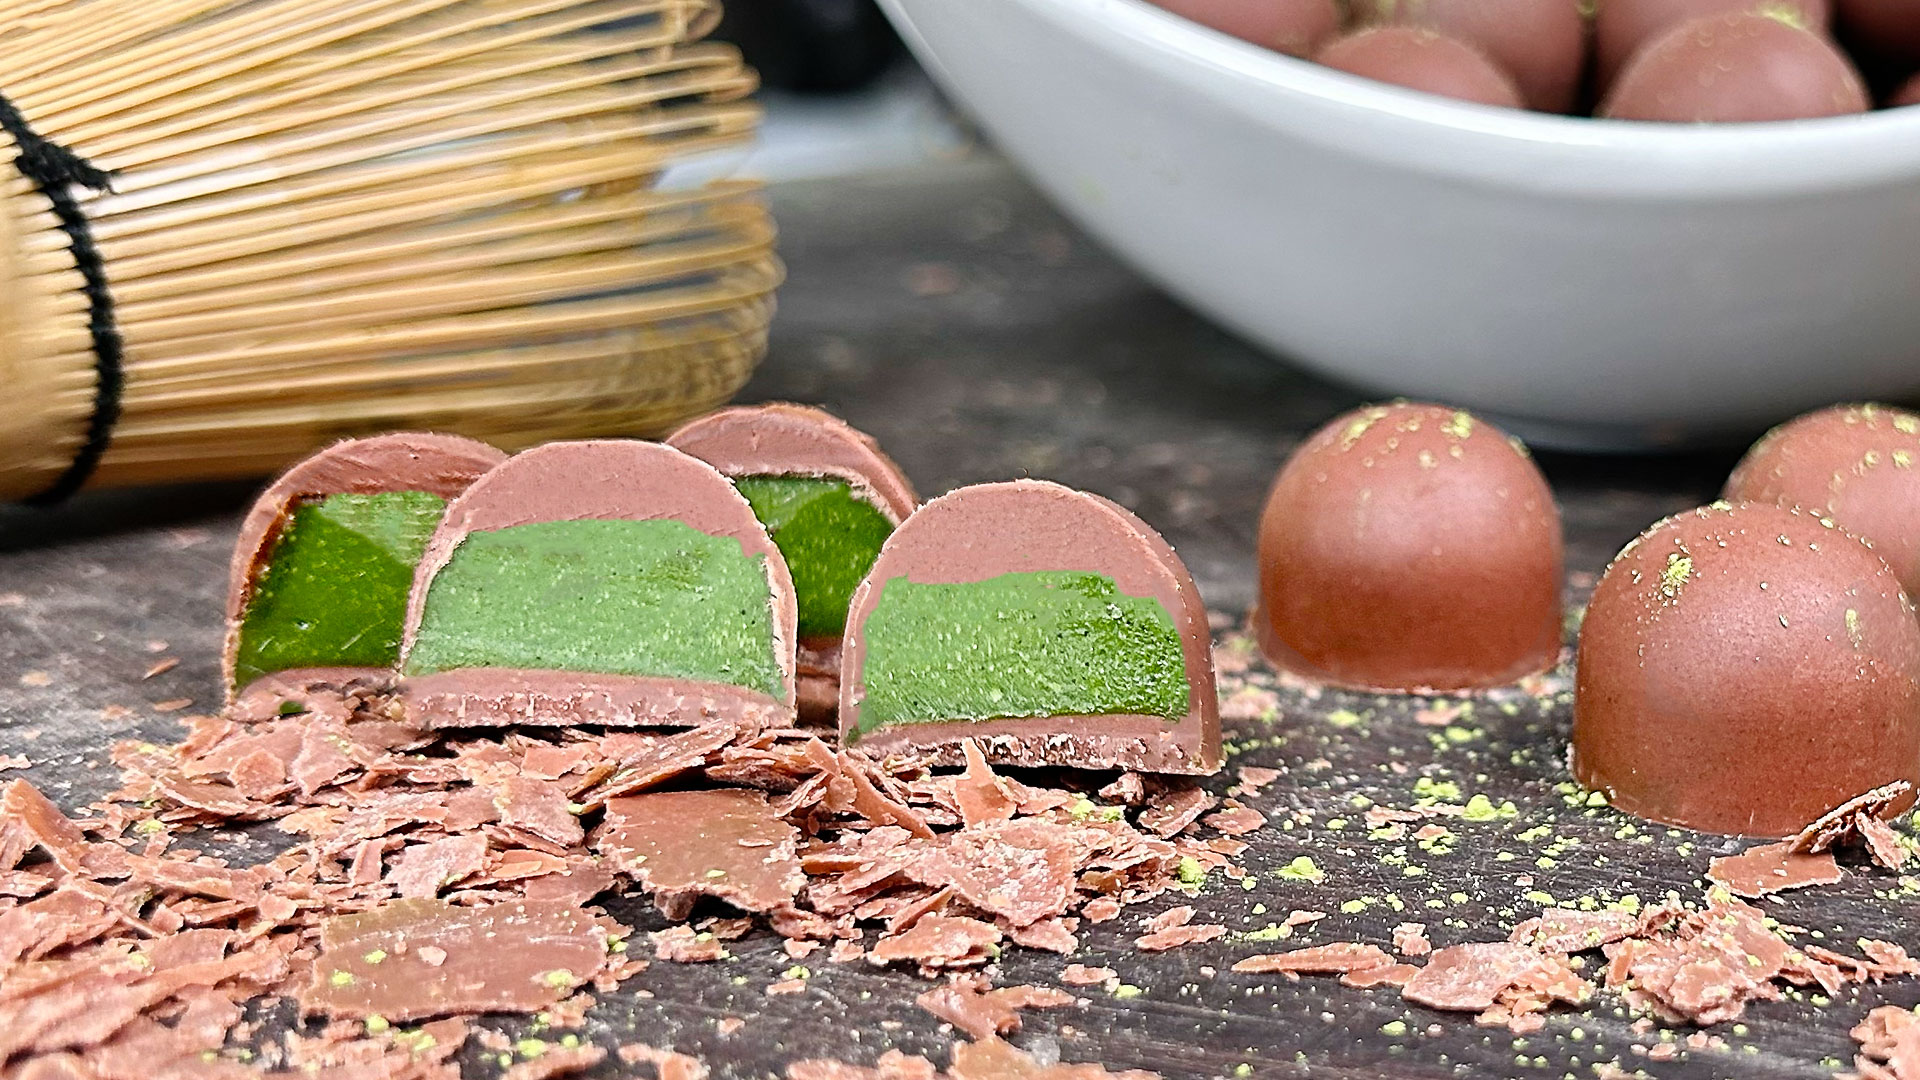 The iconic flavor of Meiji Matcha Milk Chocolate right to your kitchen with our easy DIY recipe. If you're a fan of the delightful combination of creamy milk chocolate and earthy matcha, then you're in for a treat! #meiji #matcha #bestmatcha #matcharecipe #chocolaterecipe #homemadechocolate #dessert #veganchocolate